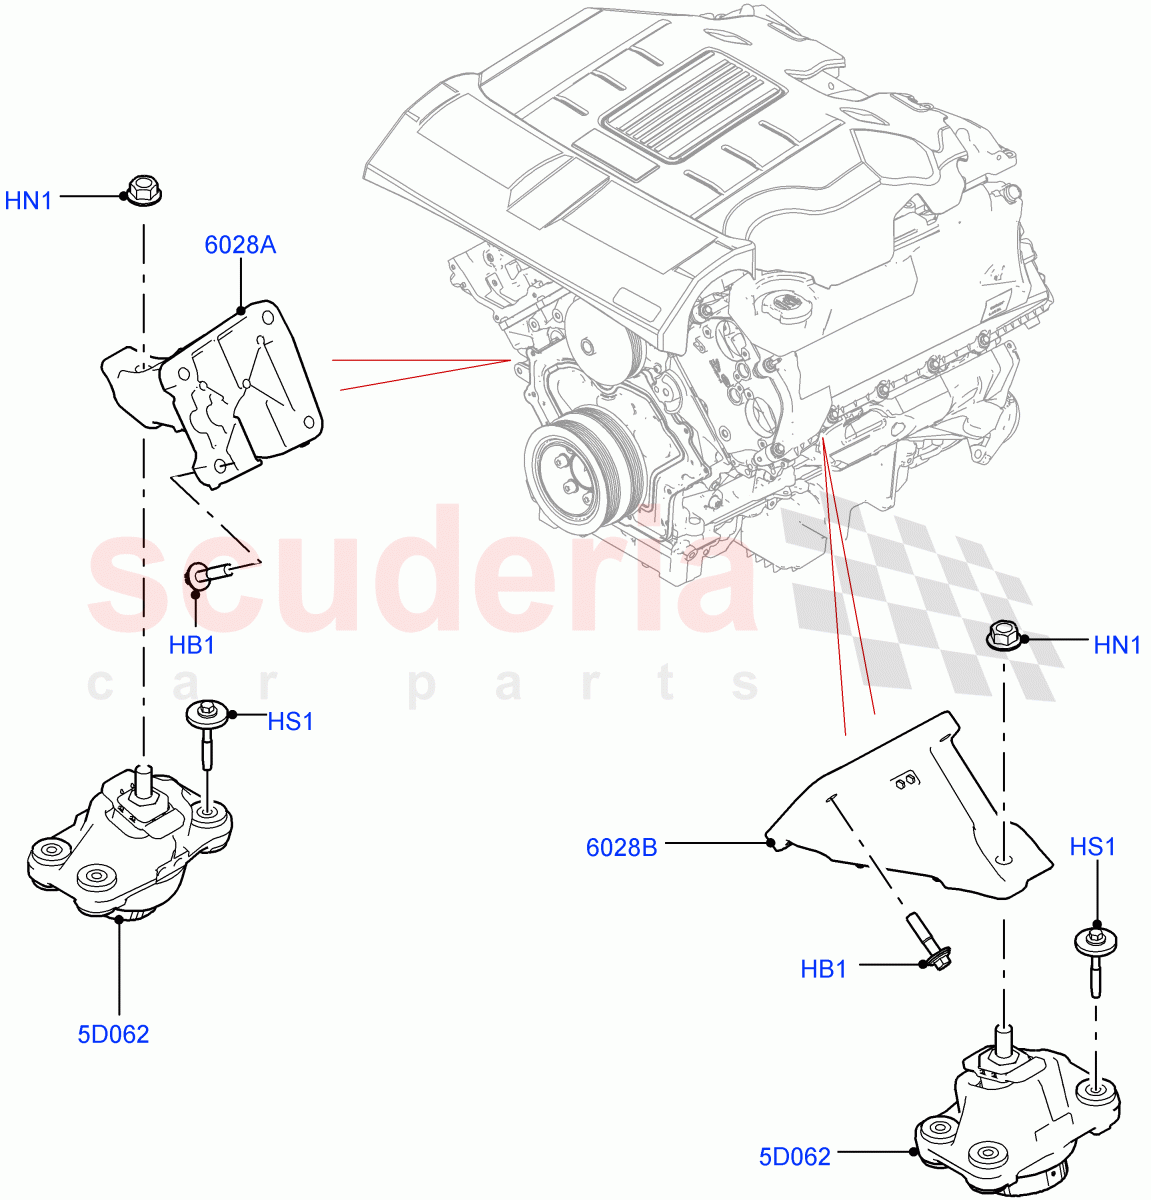 Engine Mounting(Nitra Plant Build)(3.0L DOHC GDI SC V6 PETROL)((V)FROMK2000001) of Land Rover Land Rover Discovery 5 (2017+) [3.0 I6 Turbo Diesel AJ20D6]